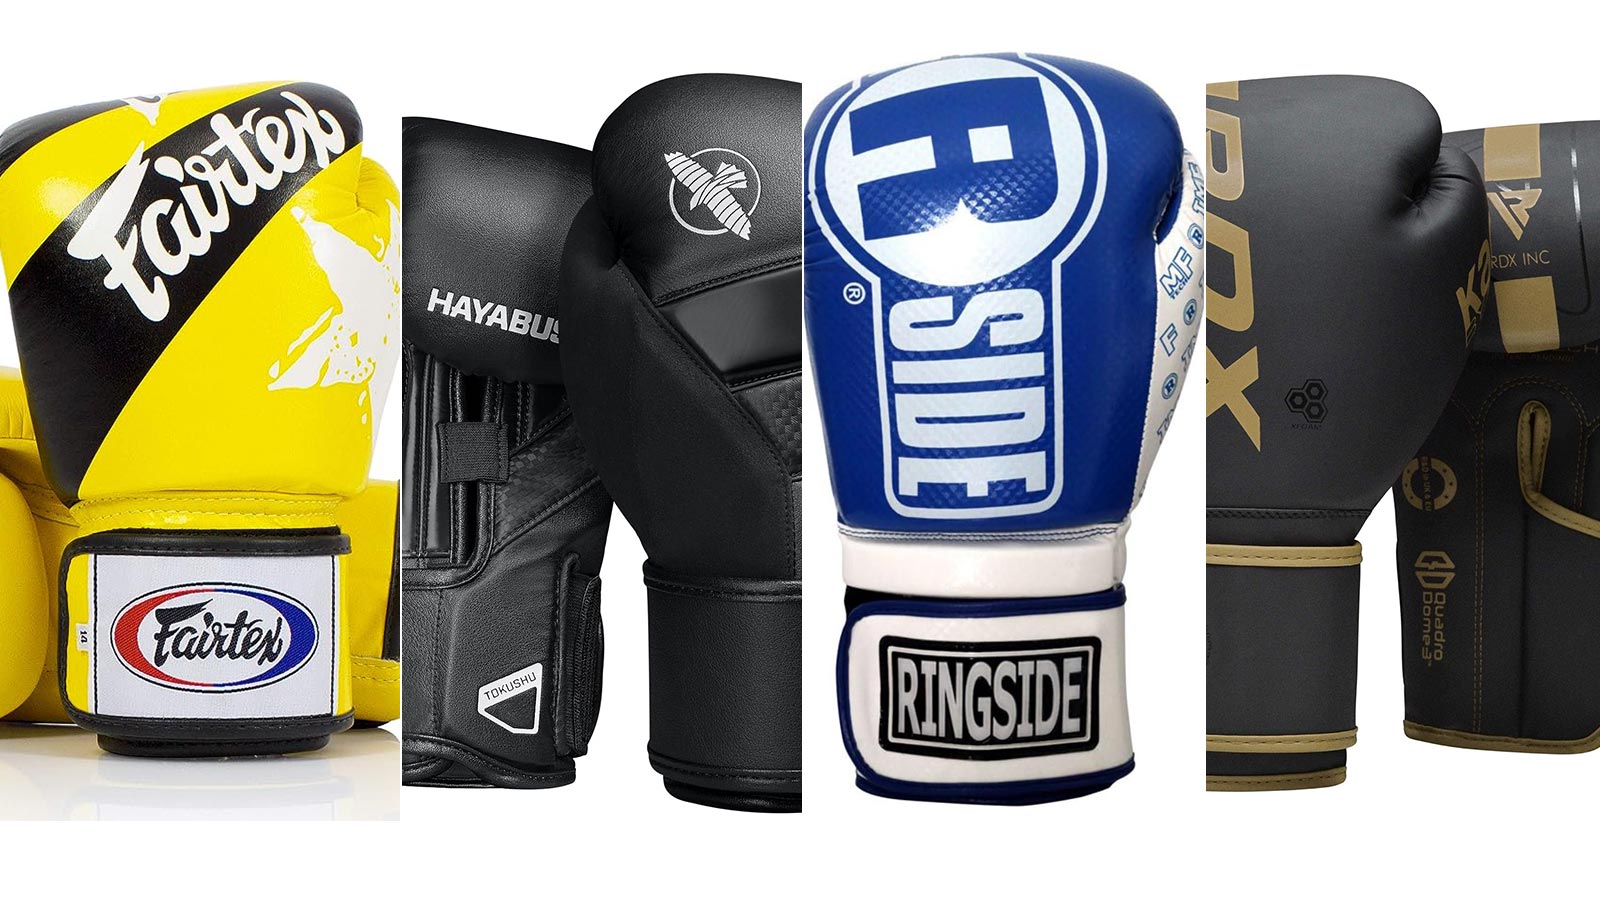 What Are The 5 BEST BRANDS Of Boxing And Combat Equipment Of 2021? 